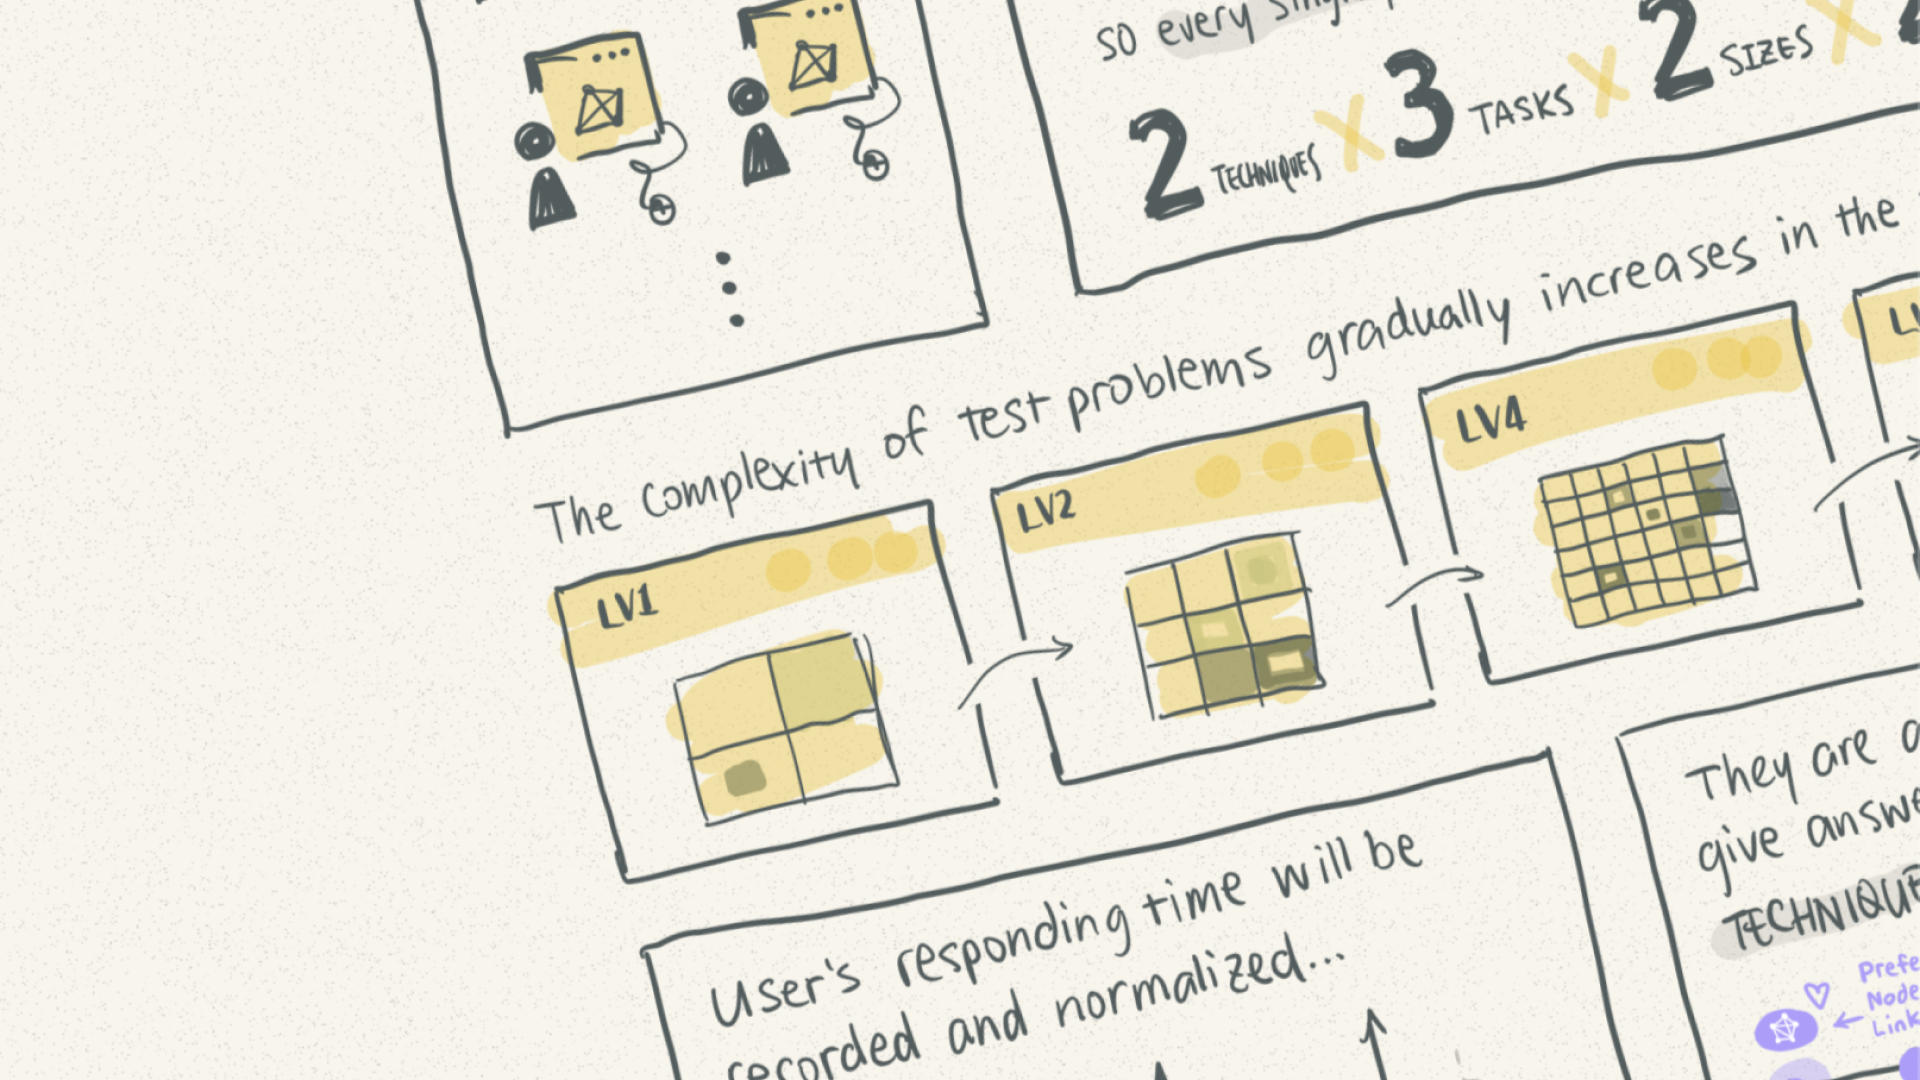 Data Comics for Reporting Controlled User Studies in Human-Computer Interaction